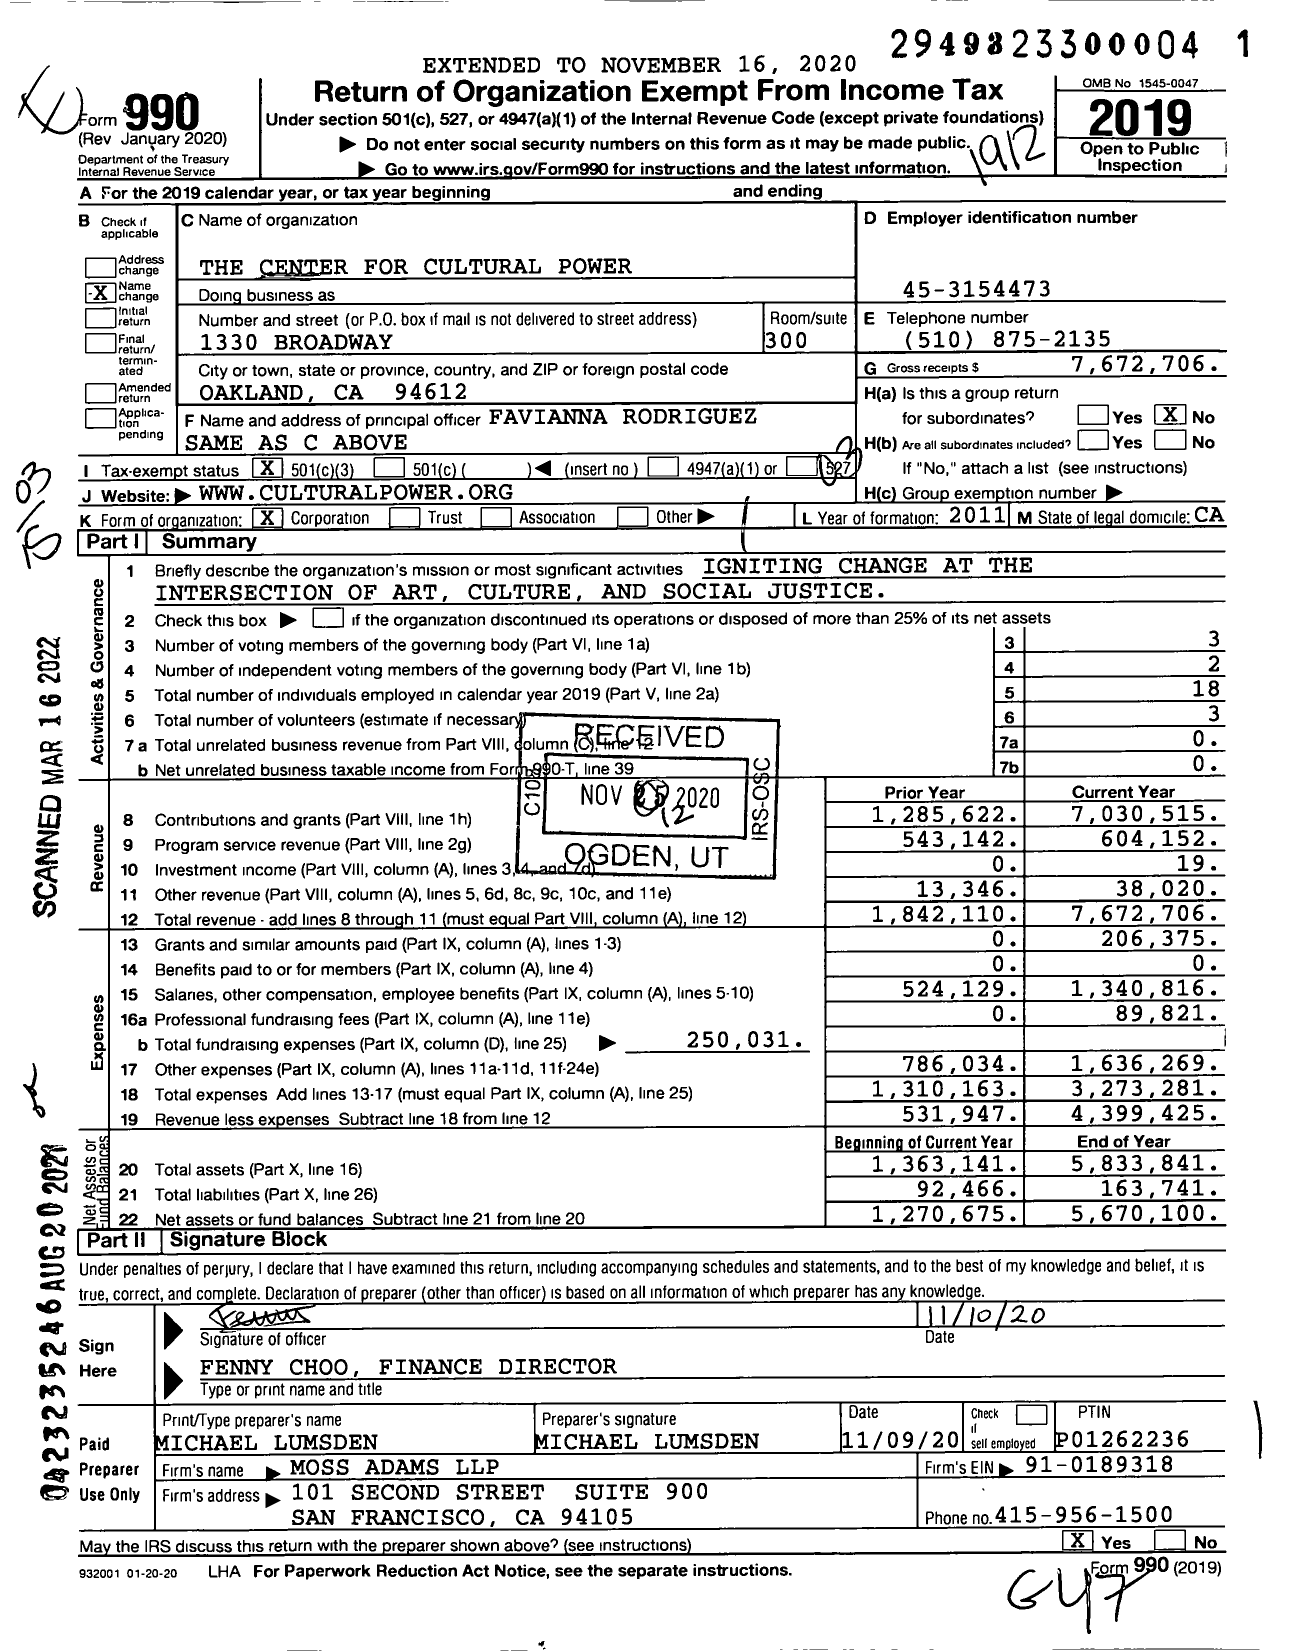 Image of first page of 2019 Form 990 for The Center for Cultural Power (CELEF)